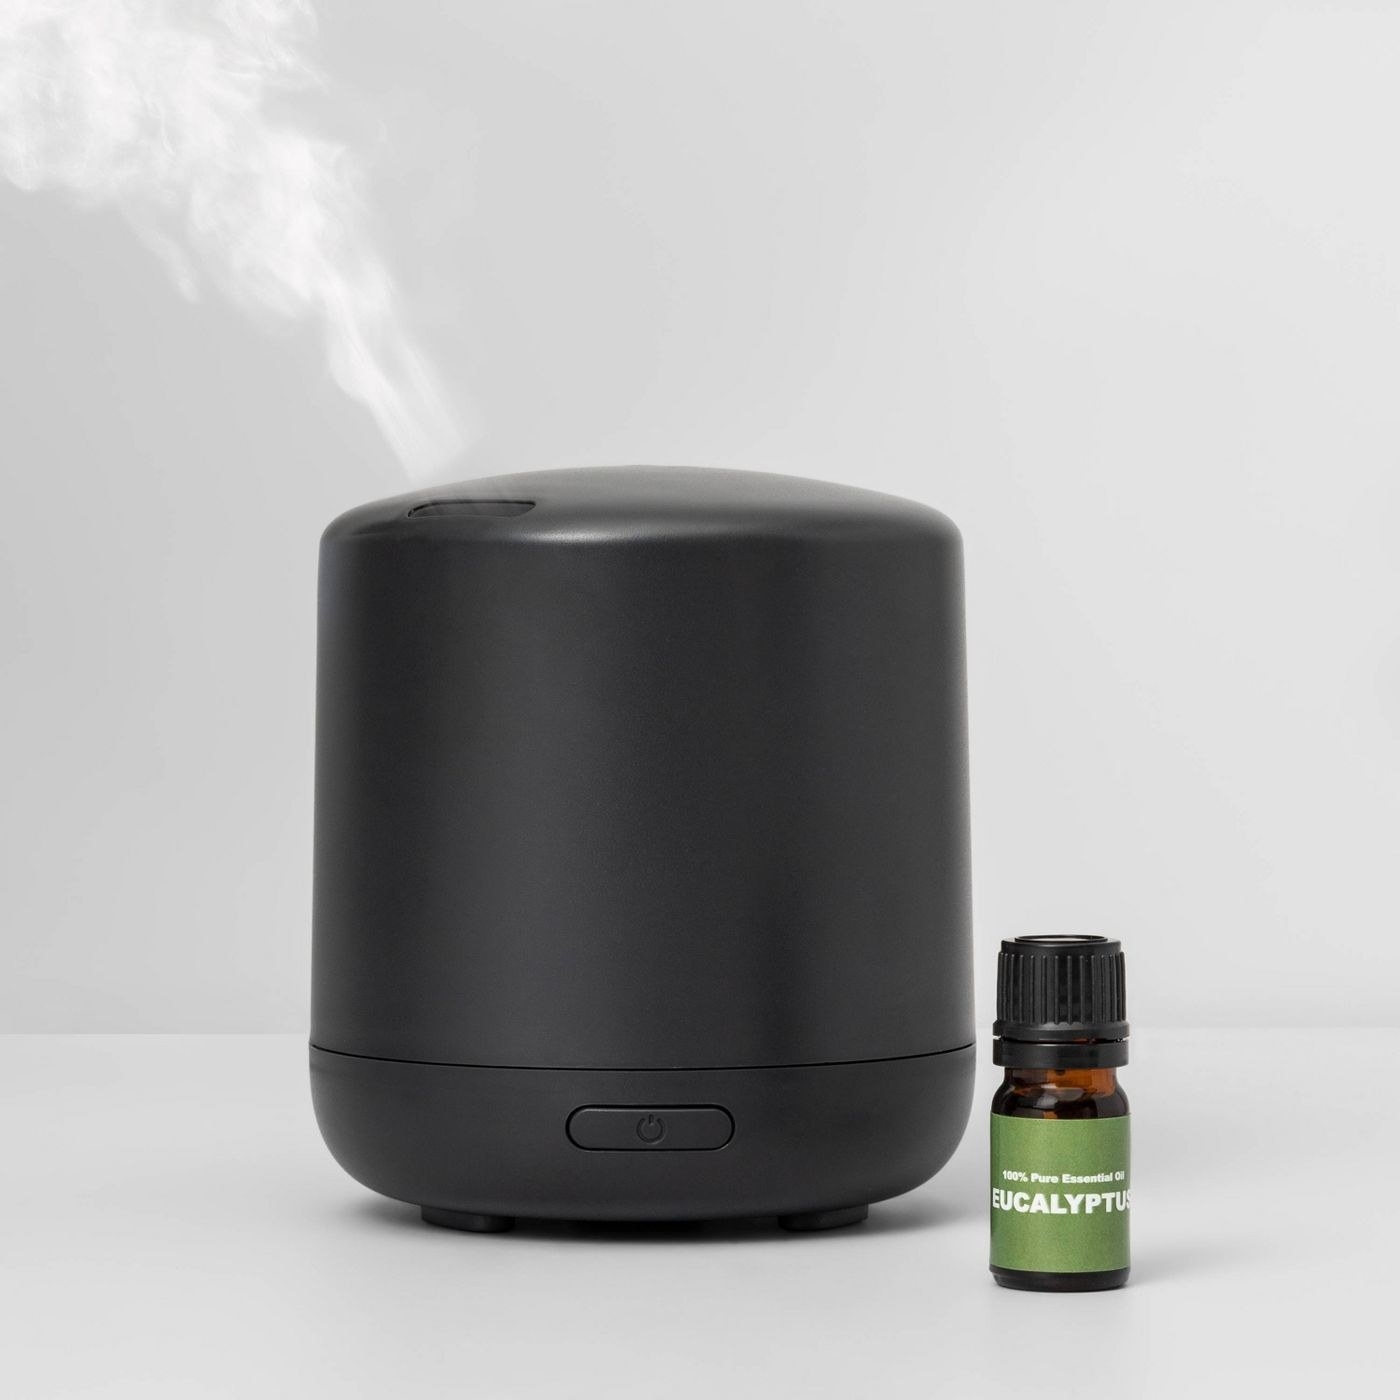 The ultrasonic essential oil diffuser and eucalyptus oil